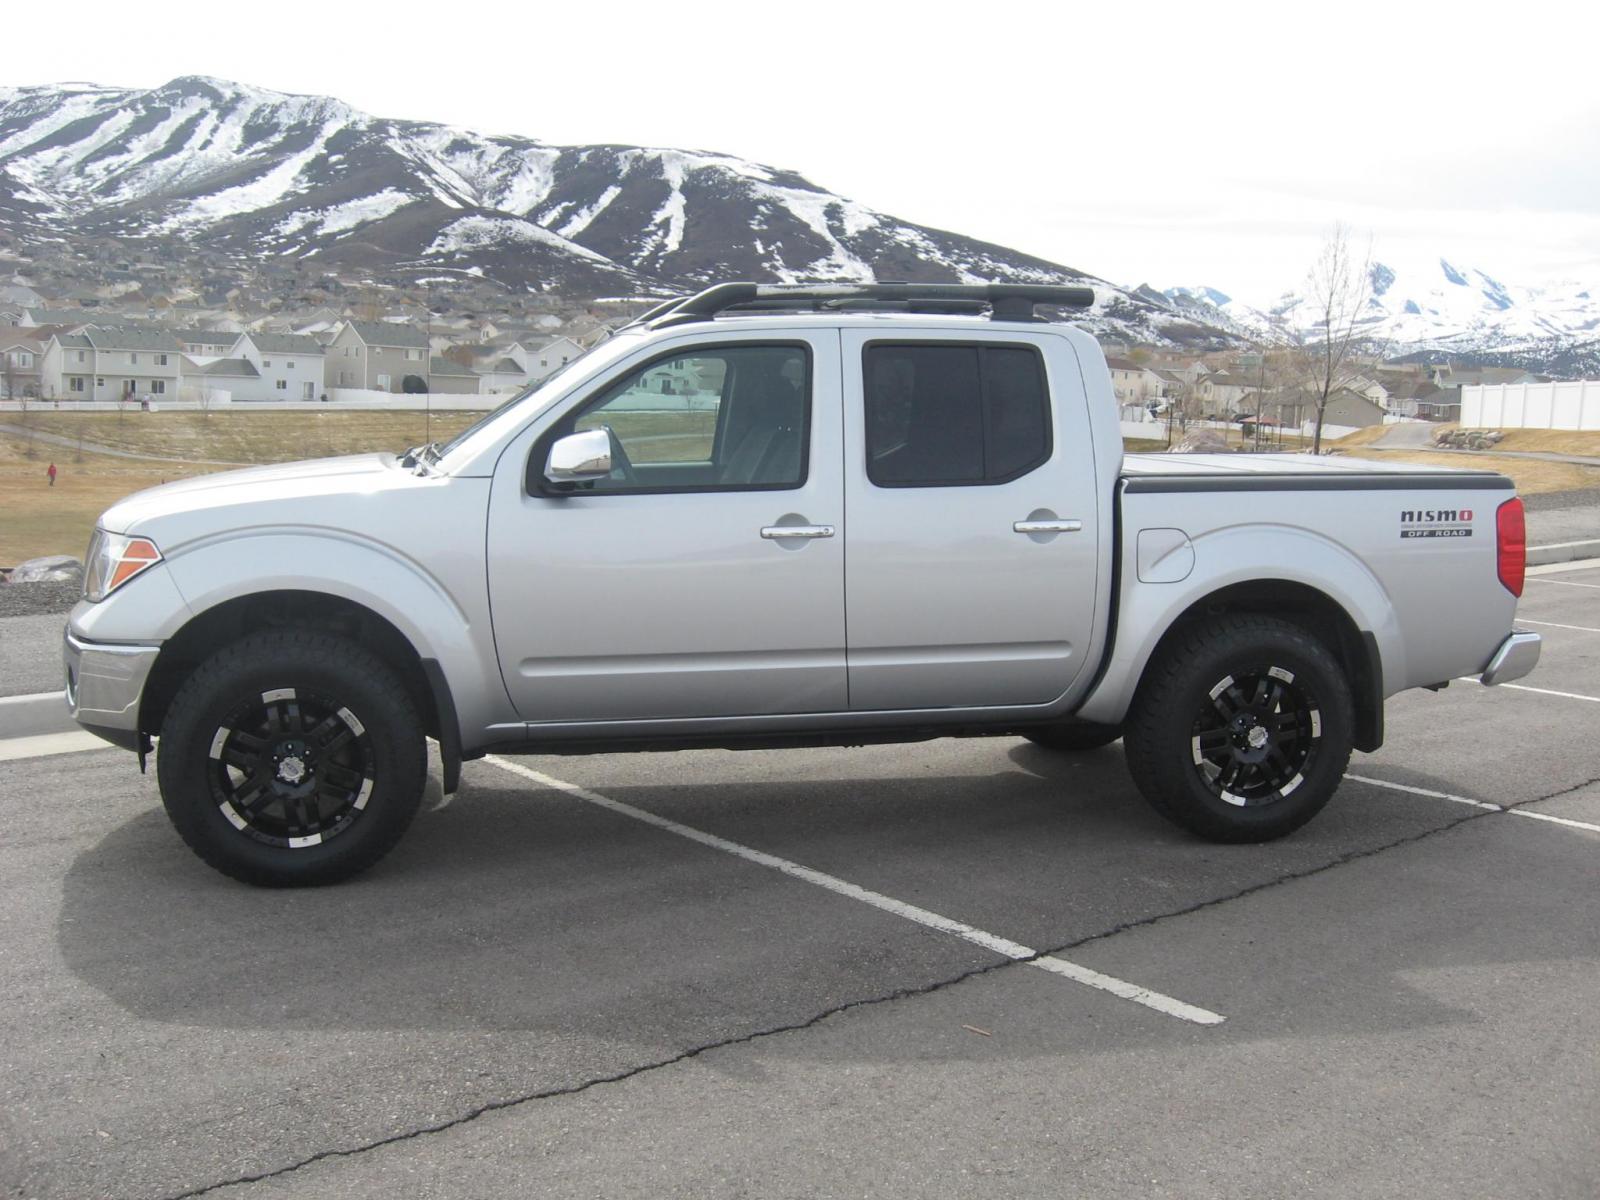 Nissan Frontier #15 - size 1600.